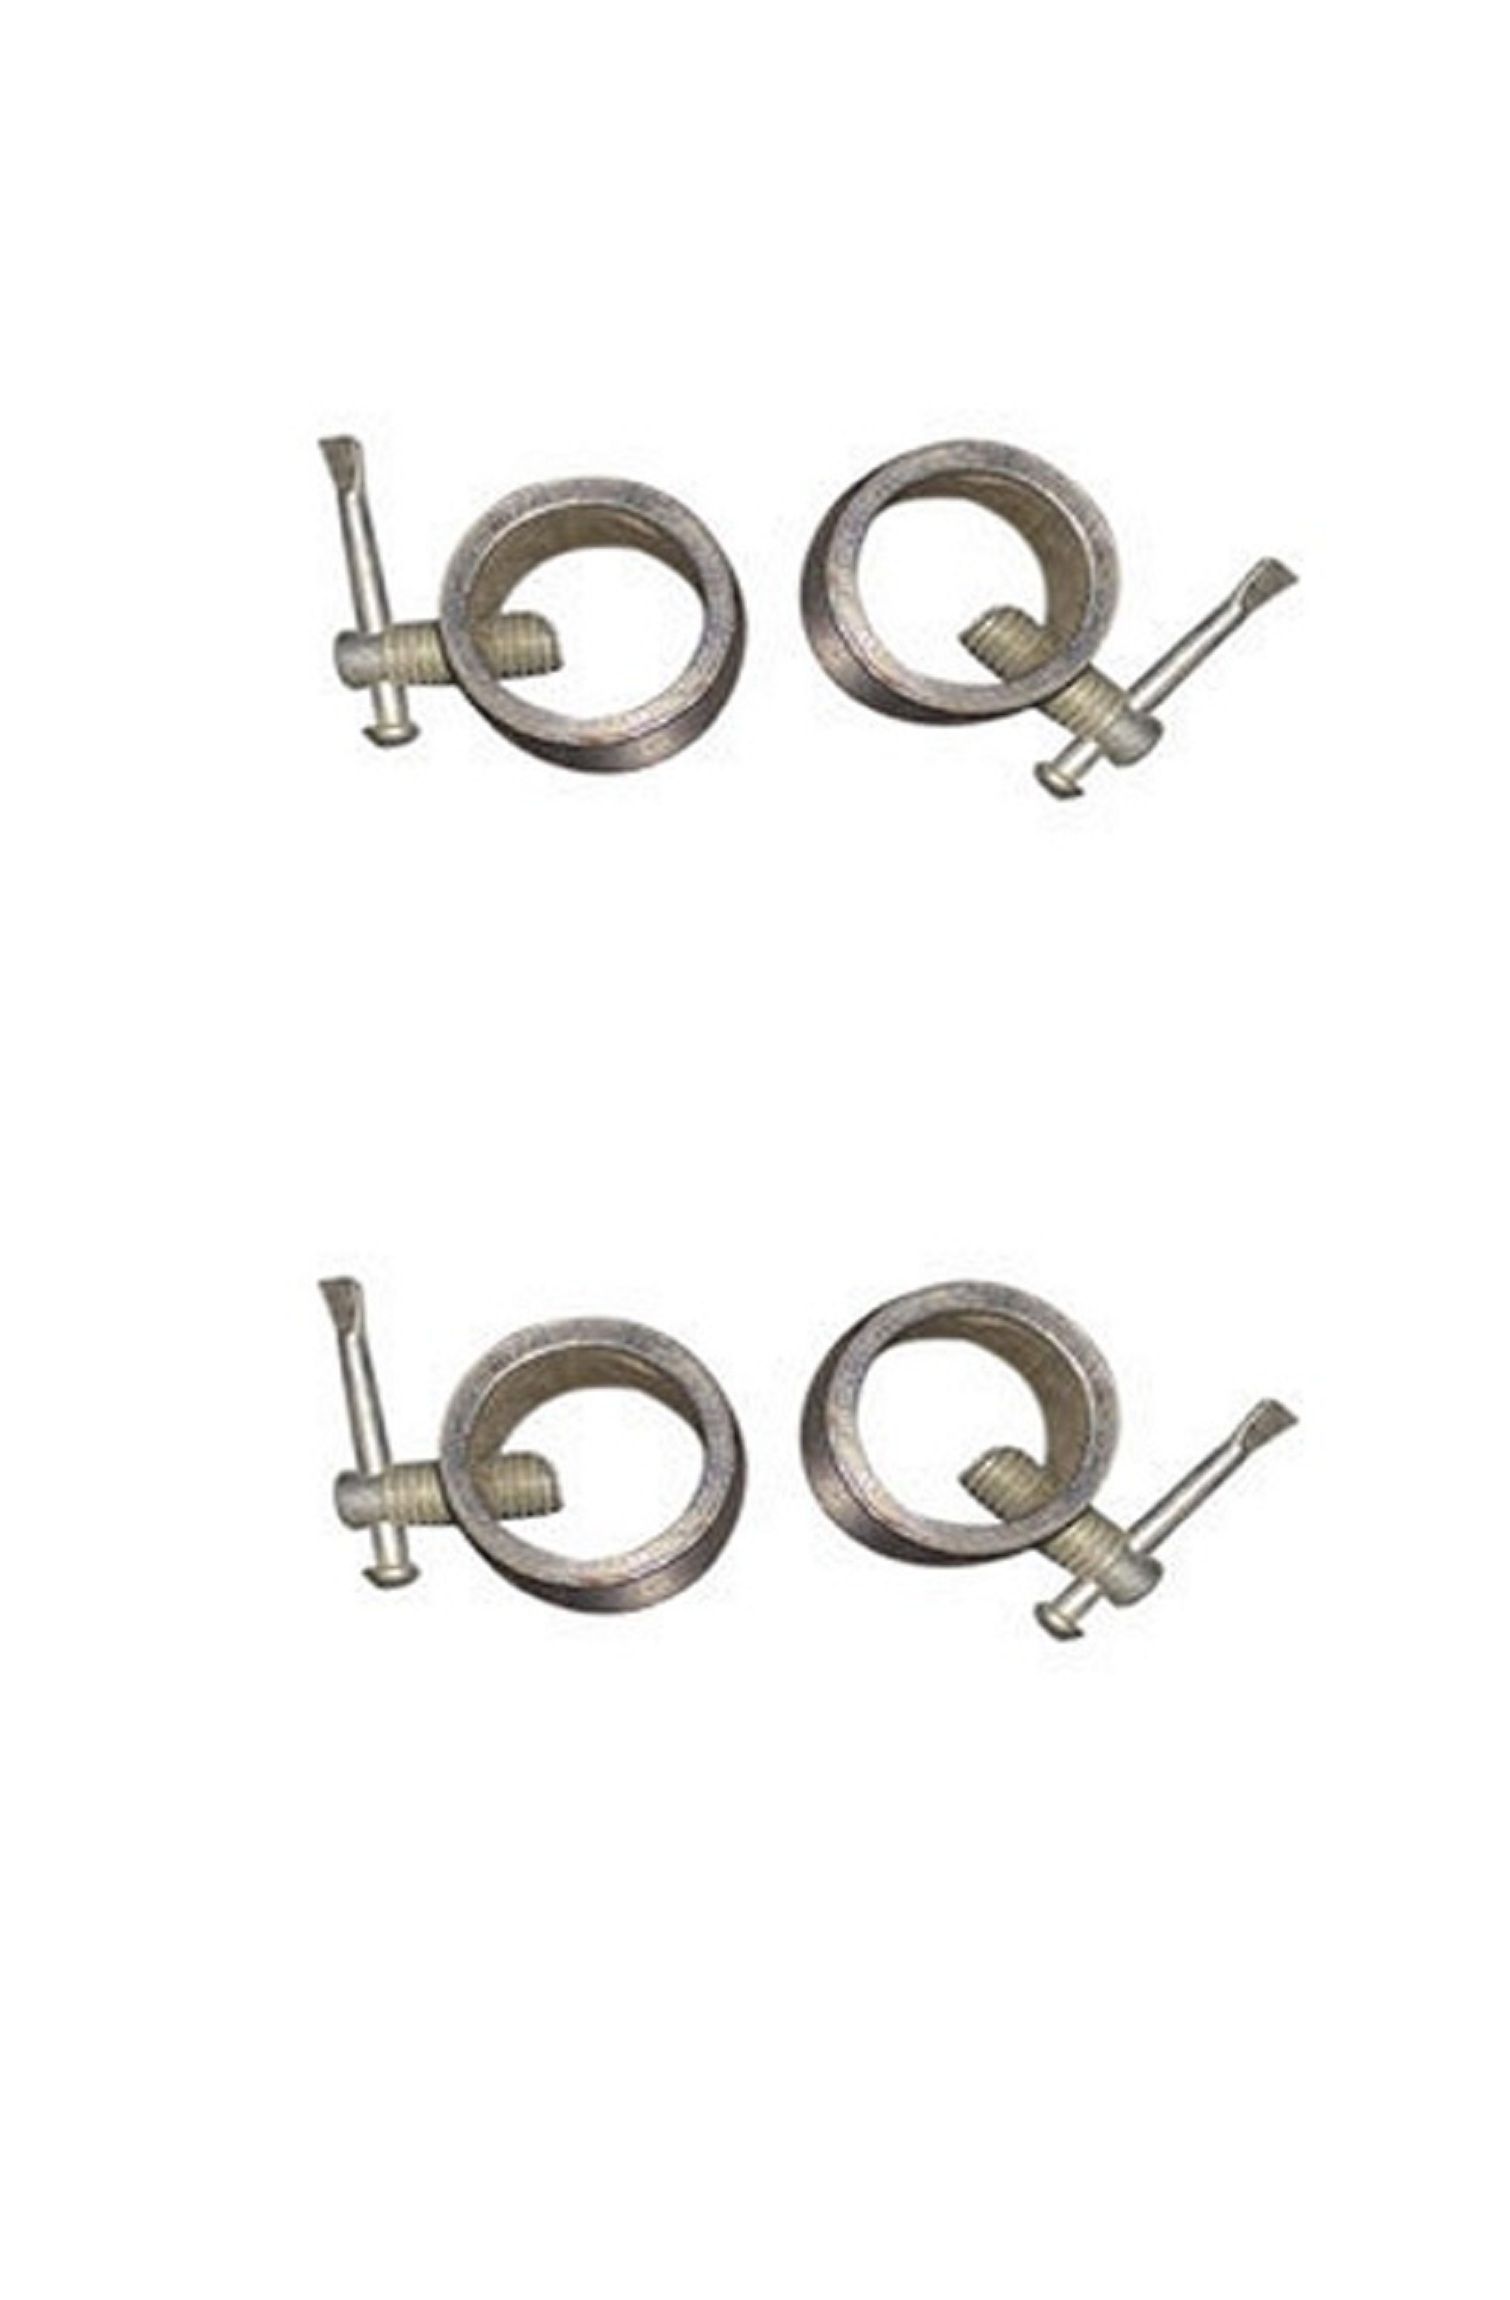     			A1VK  PREMIUM Steel Locks ( Pack of 4) For Weight Lifting Bar